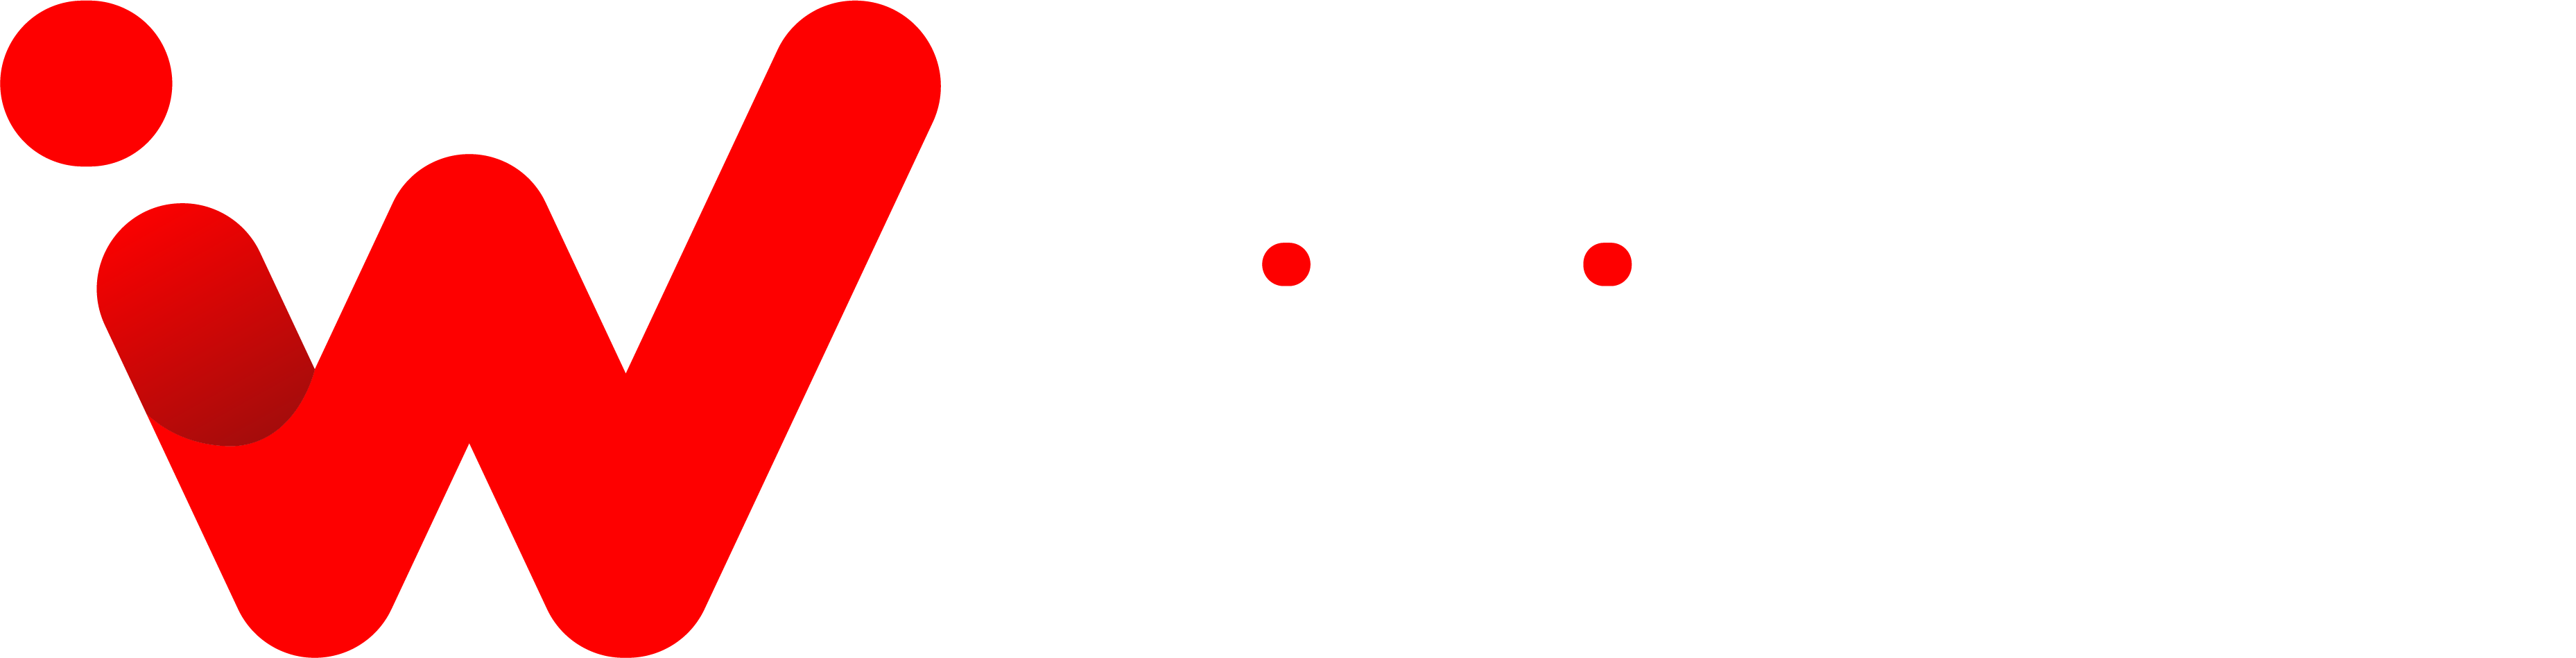 WikiHave